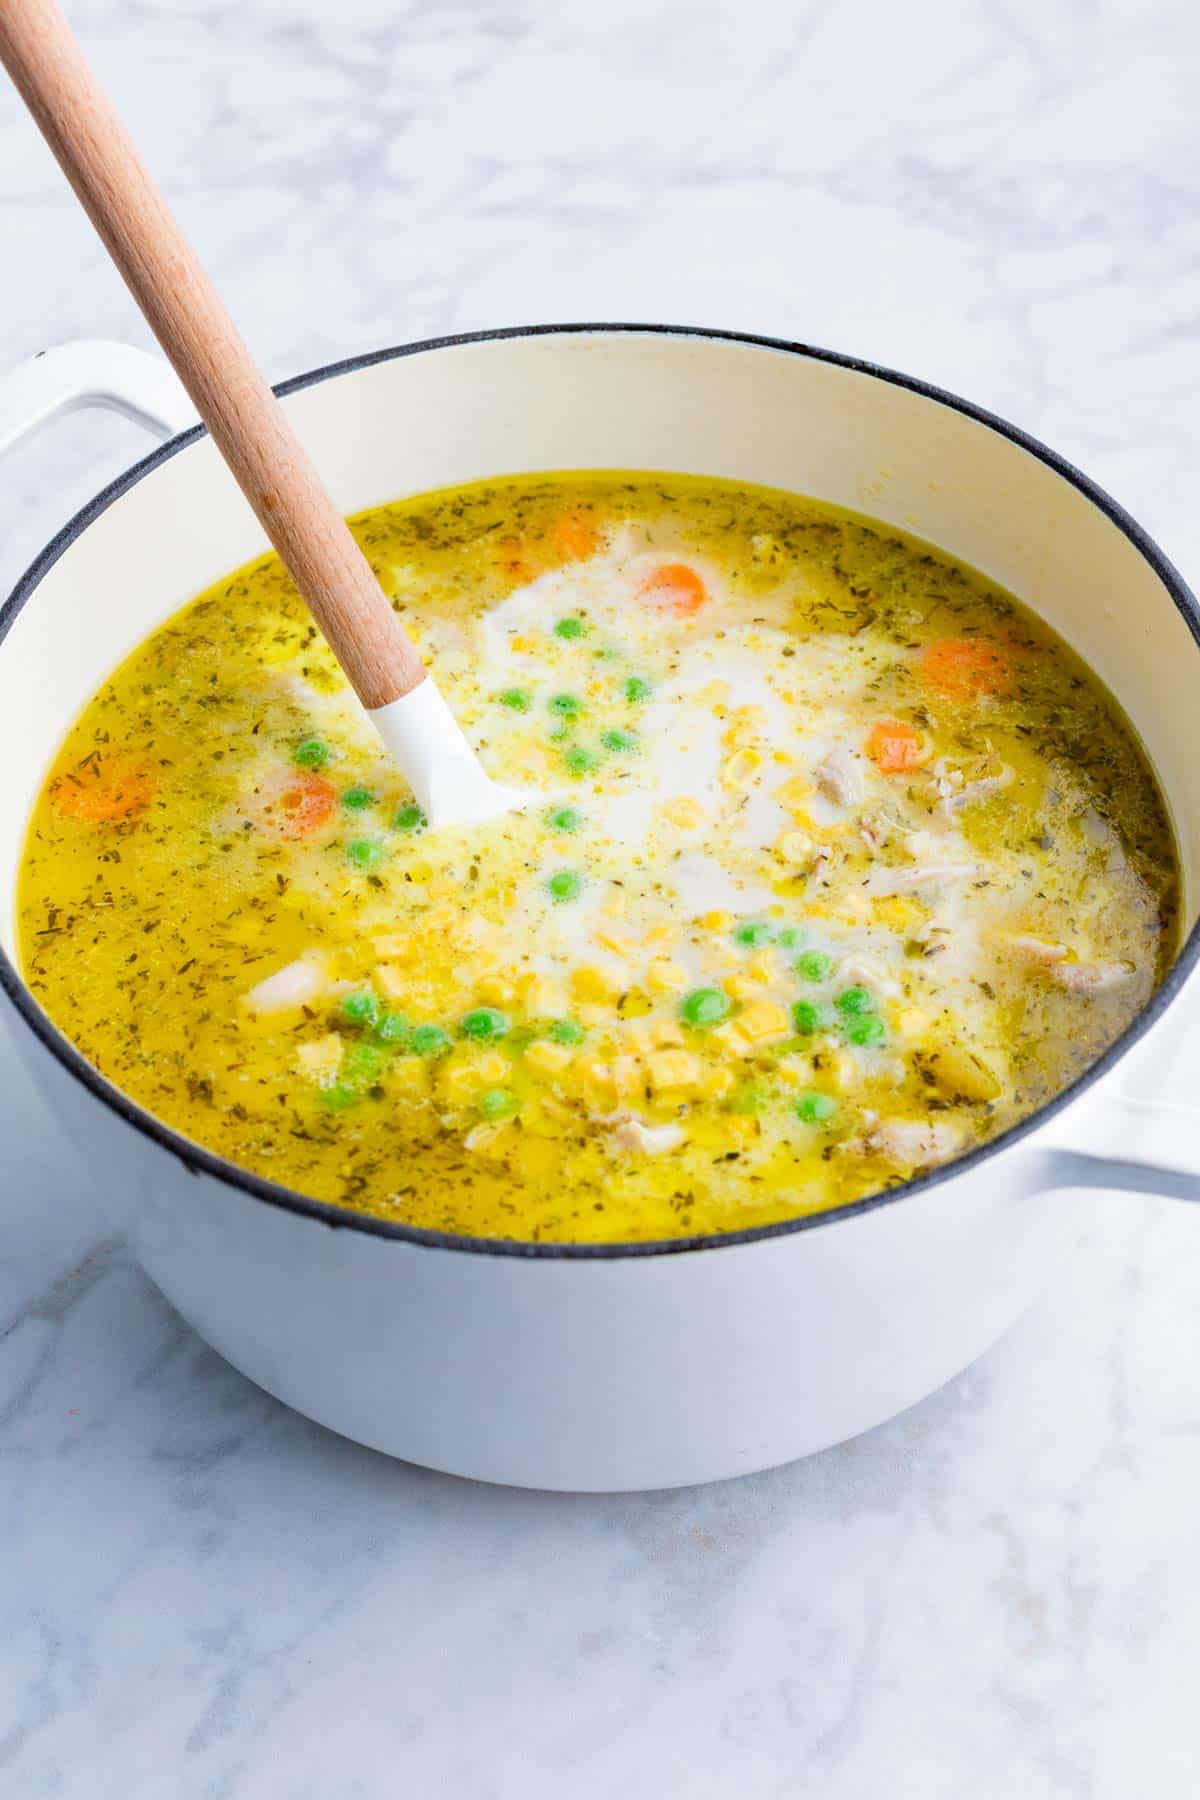 Frozen peas and corn along with milk are added to the soup.